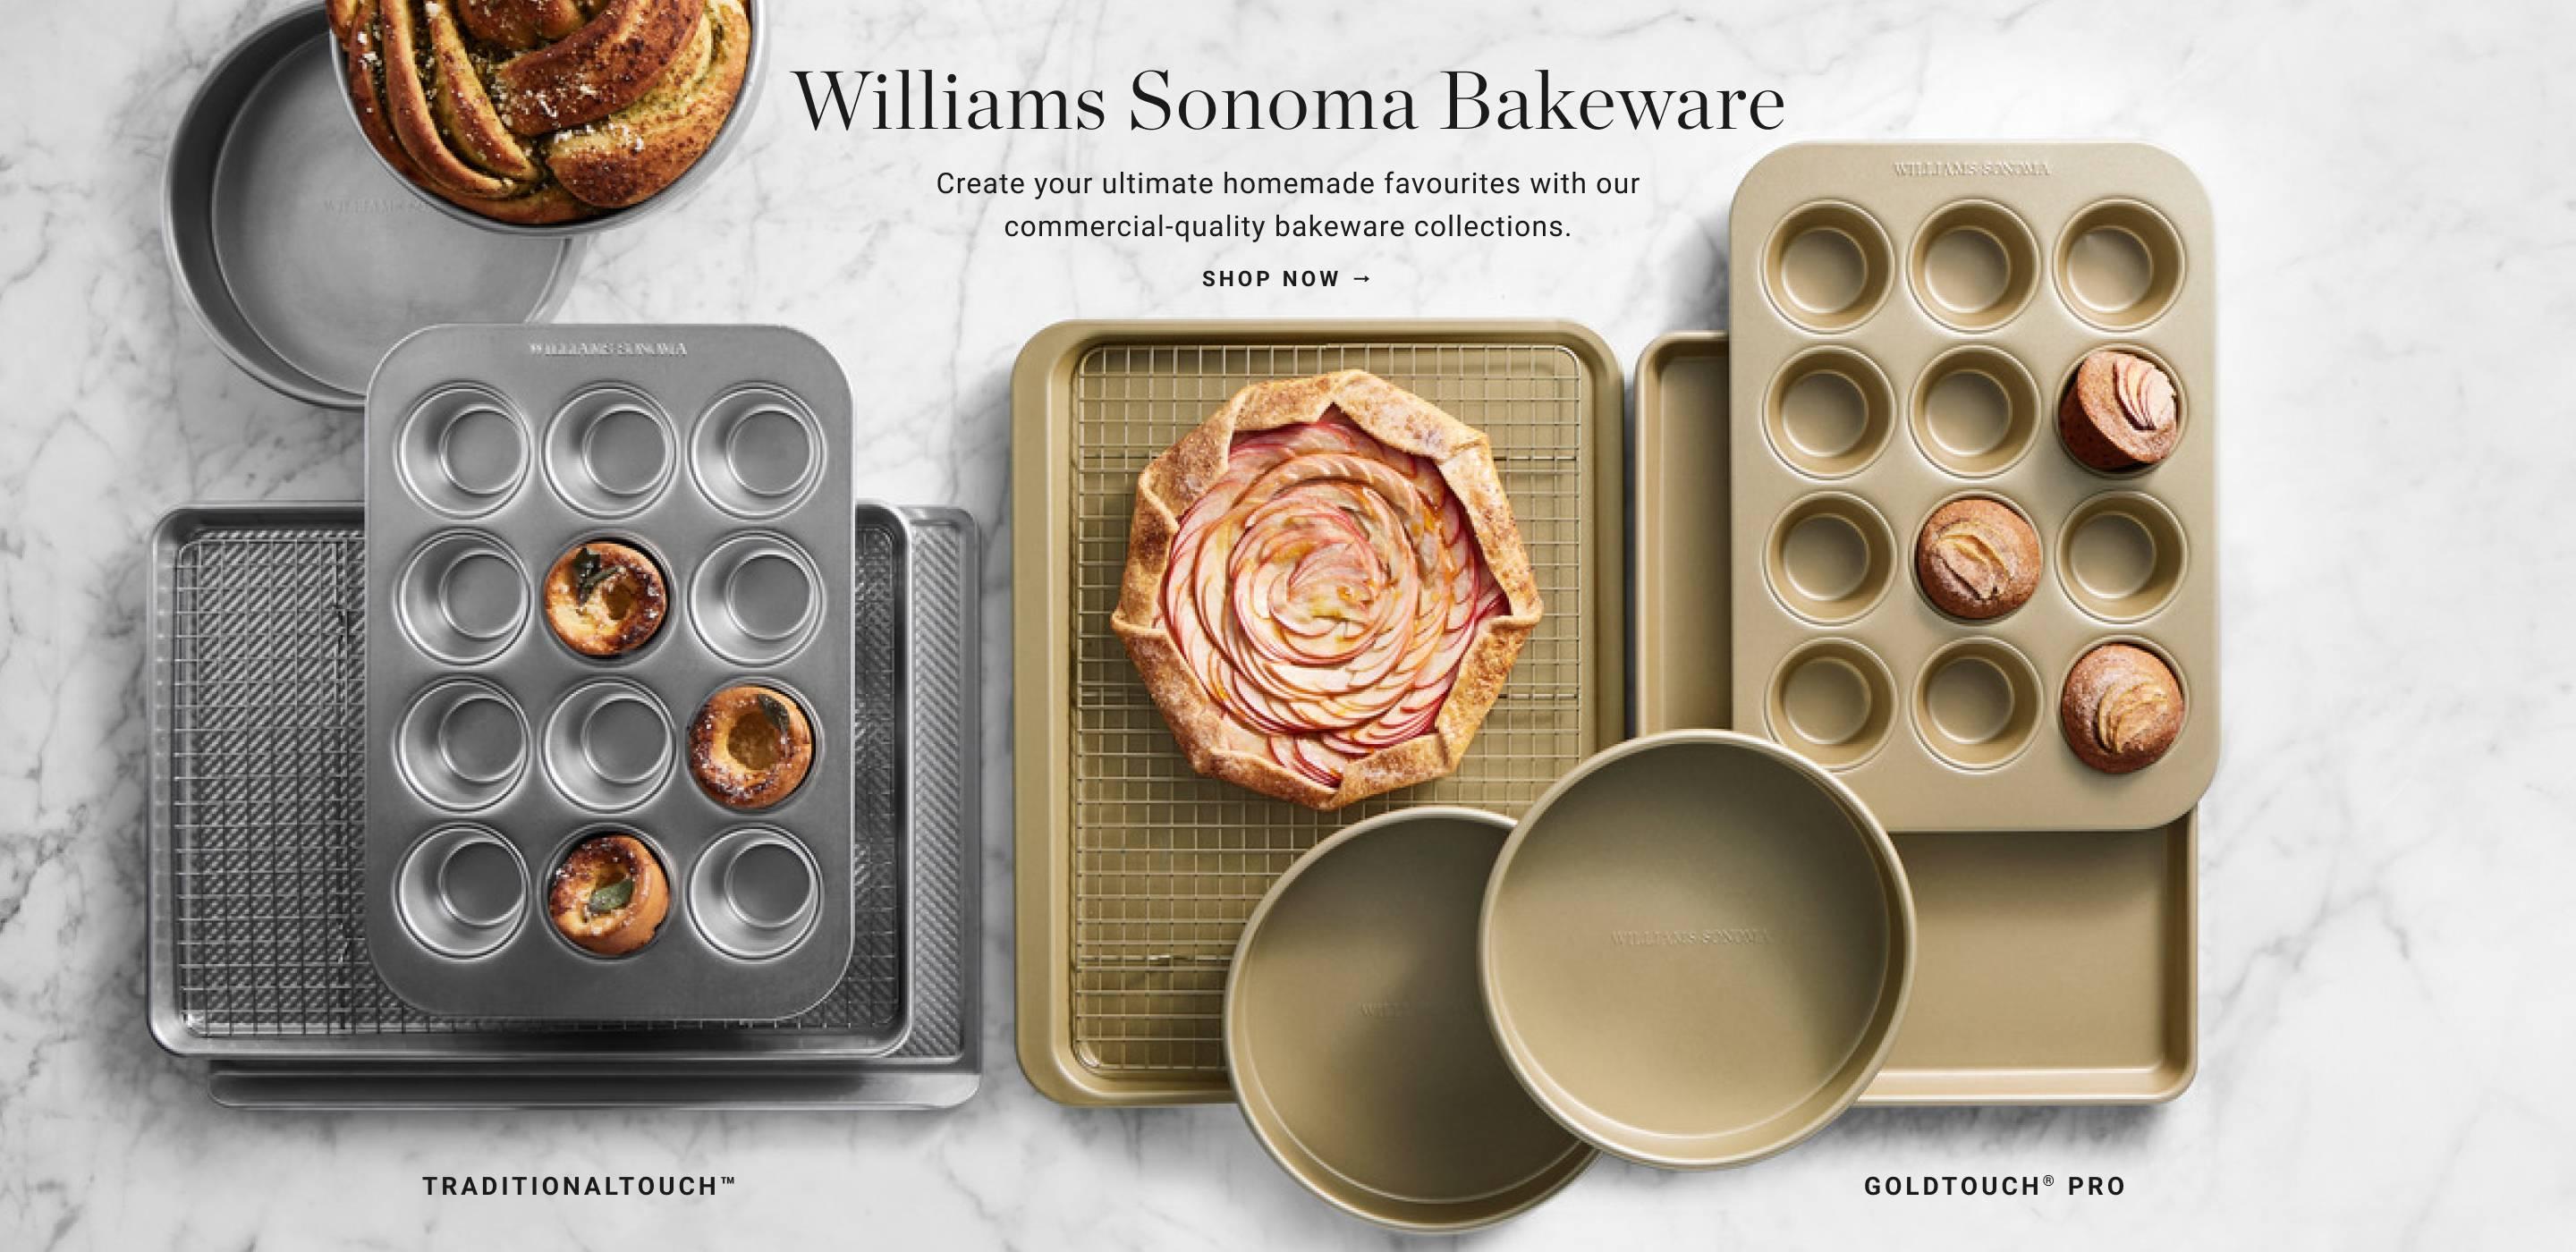 Williams Sonoma Bakeware | Create your ultimate homemade favourites with our commercial-quality bakeware collections. | Shop Now